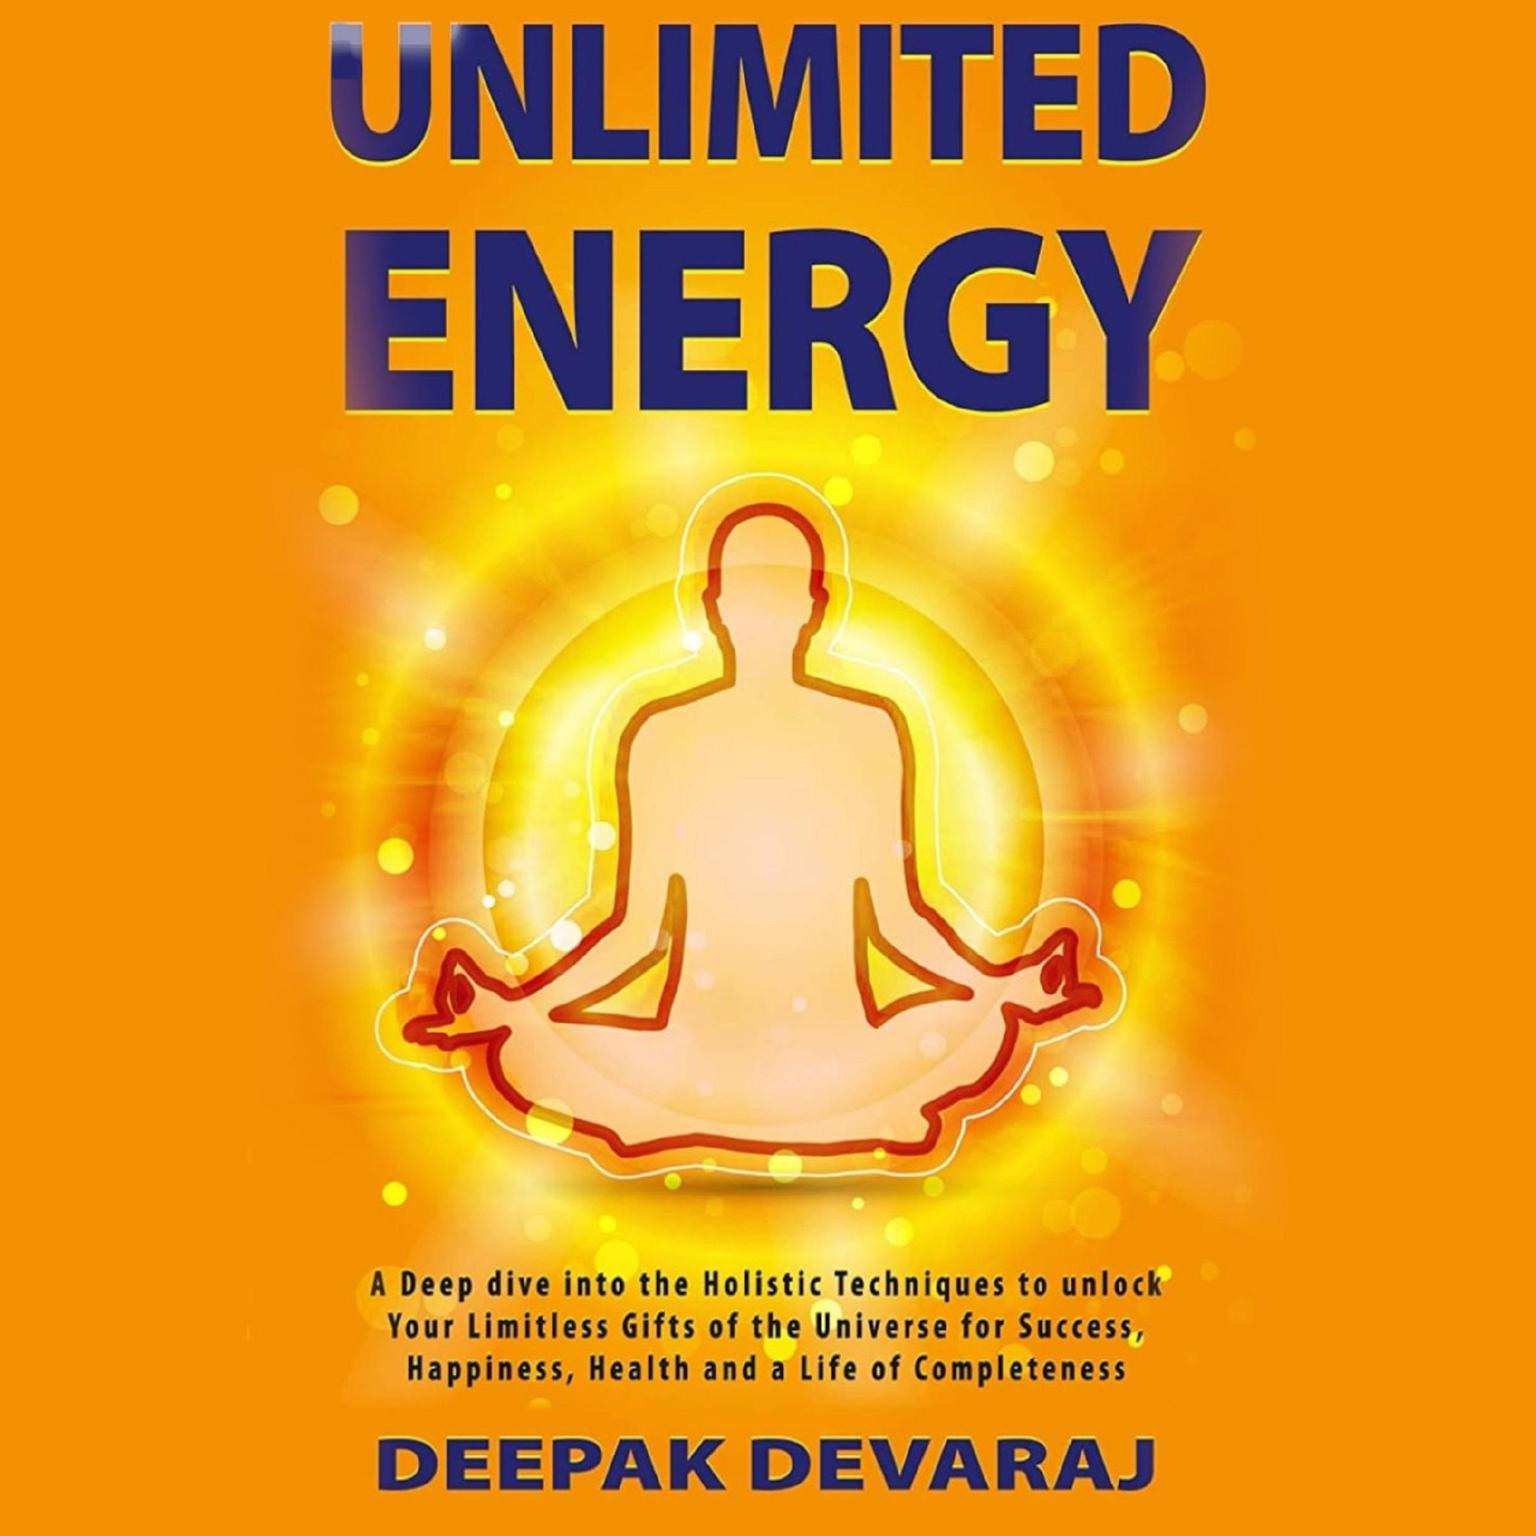 Unlimited Energy: A Deep dive into the Holistic Techniques to unlock your Limitless Gifts of the Universe for Success, Happiness, Health and a Life of Completeness Audiobook, by Deepak Devaraj